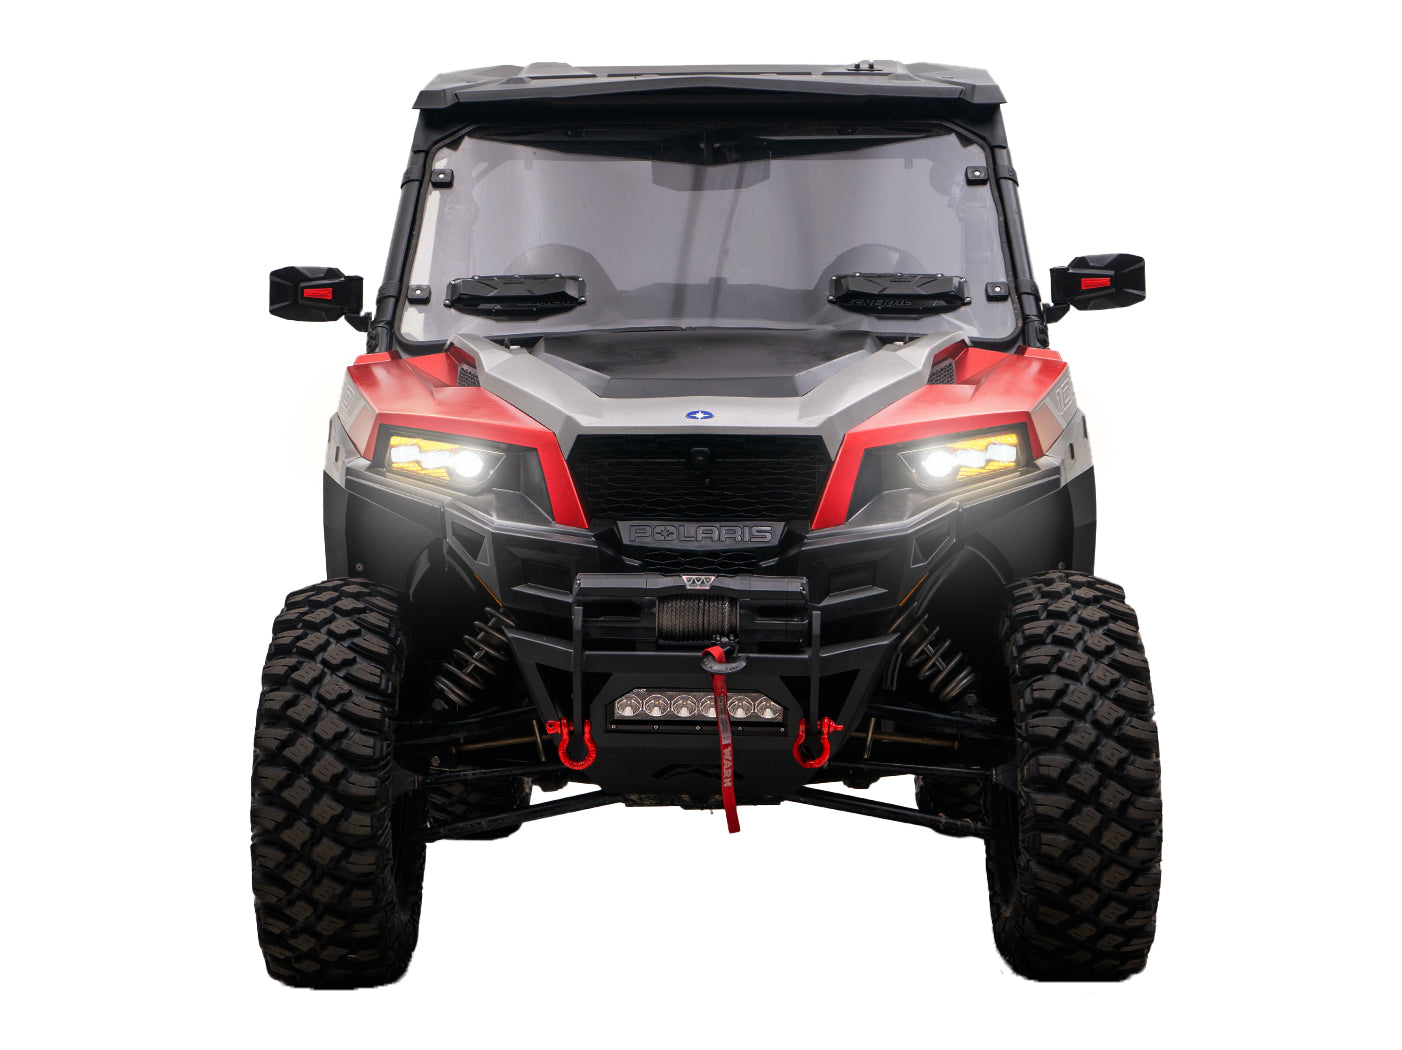 General/RZR Replacement Headlights